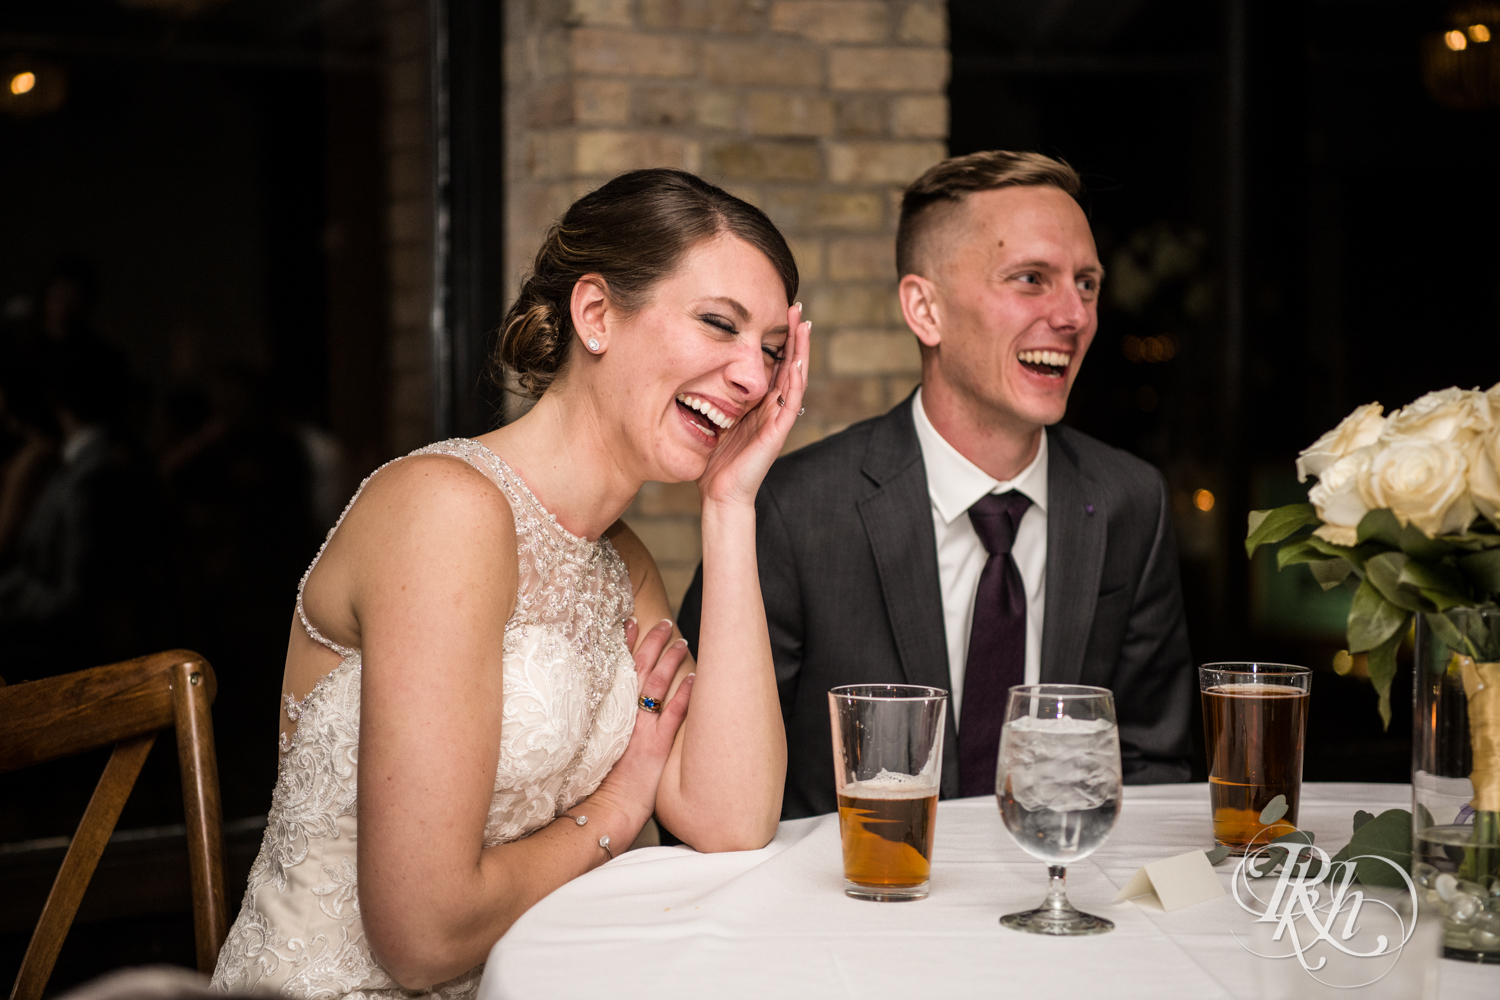 Bride and groom laugh during speeches at wedding reception at the Lumber Exchange Event Center in Minneapolis, Minnesota.